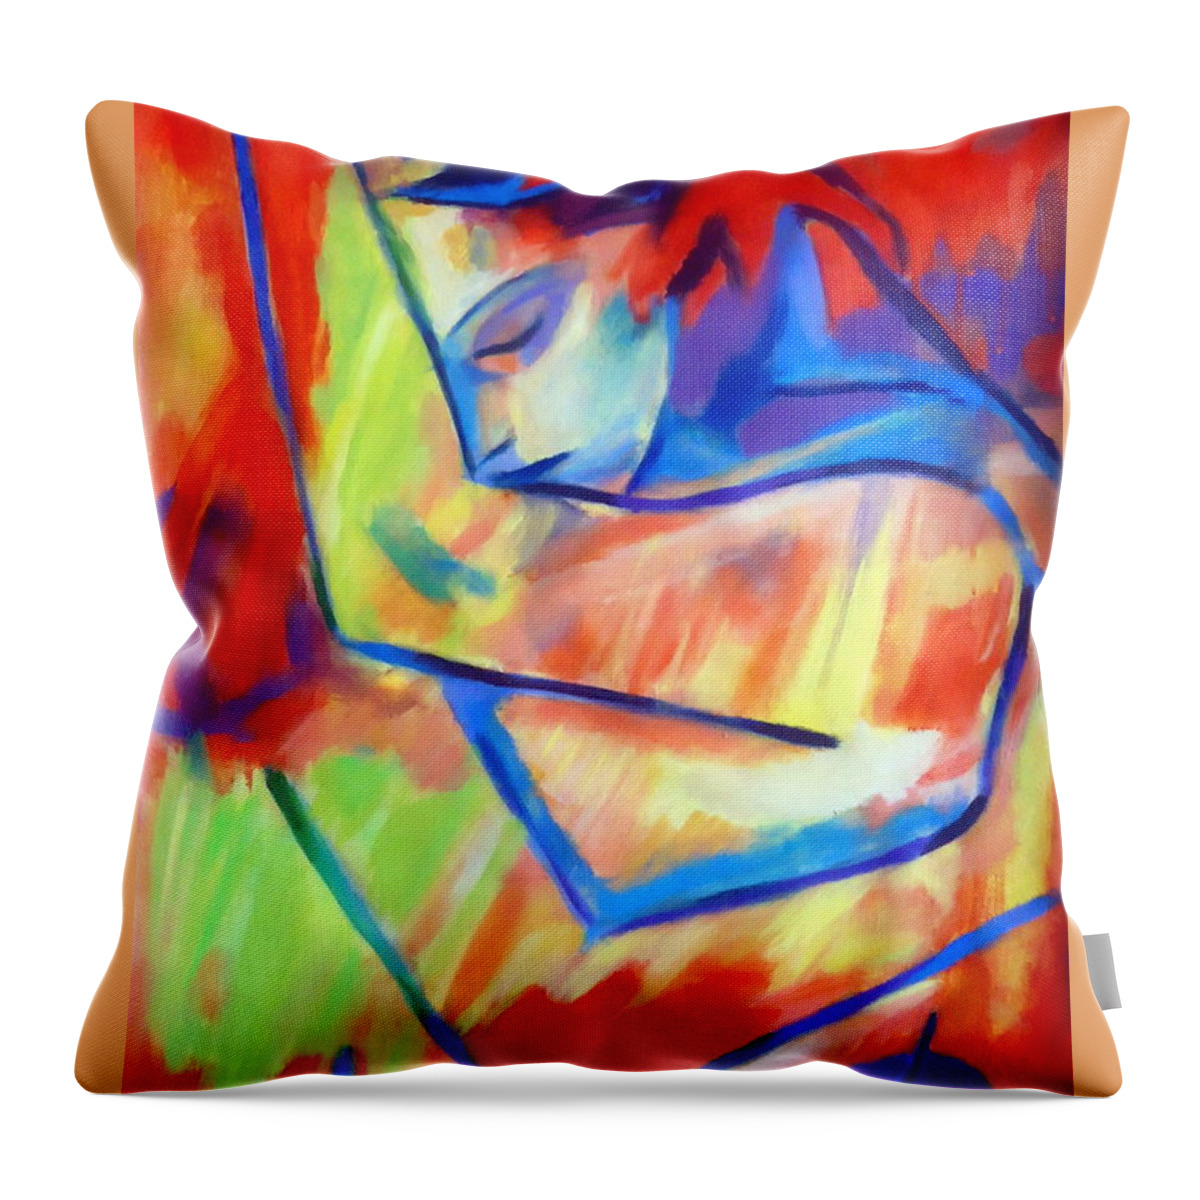 Nude Figures Throw Pillow featuring the painting Broken dreams by Helena Wierzbicki